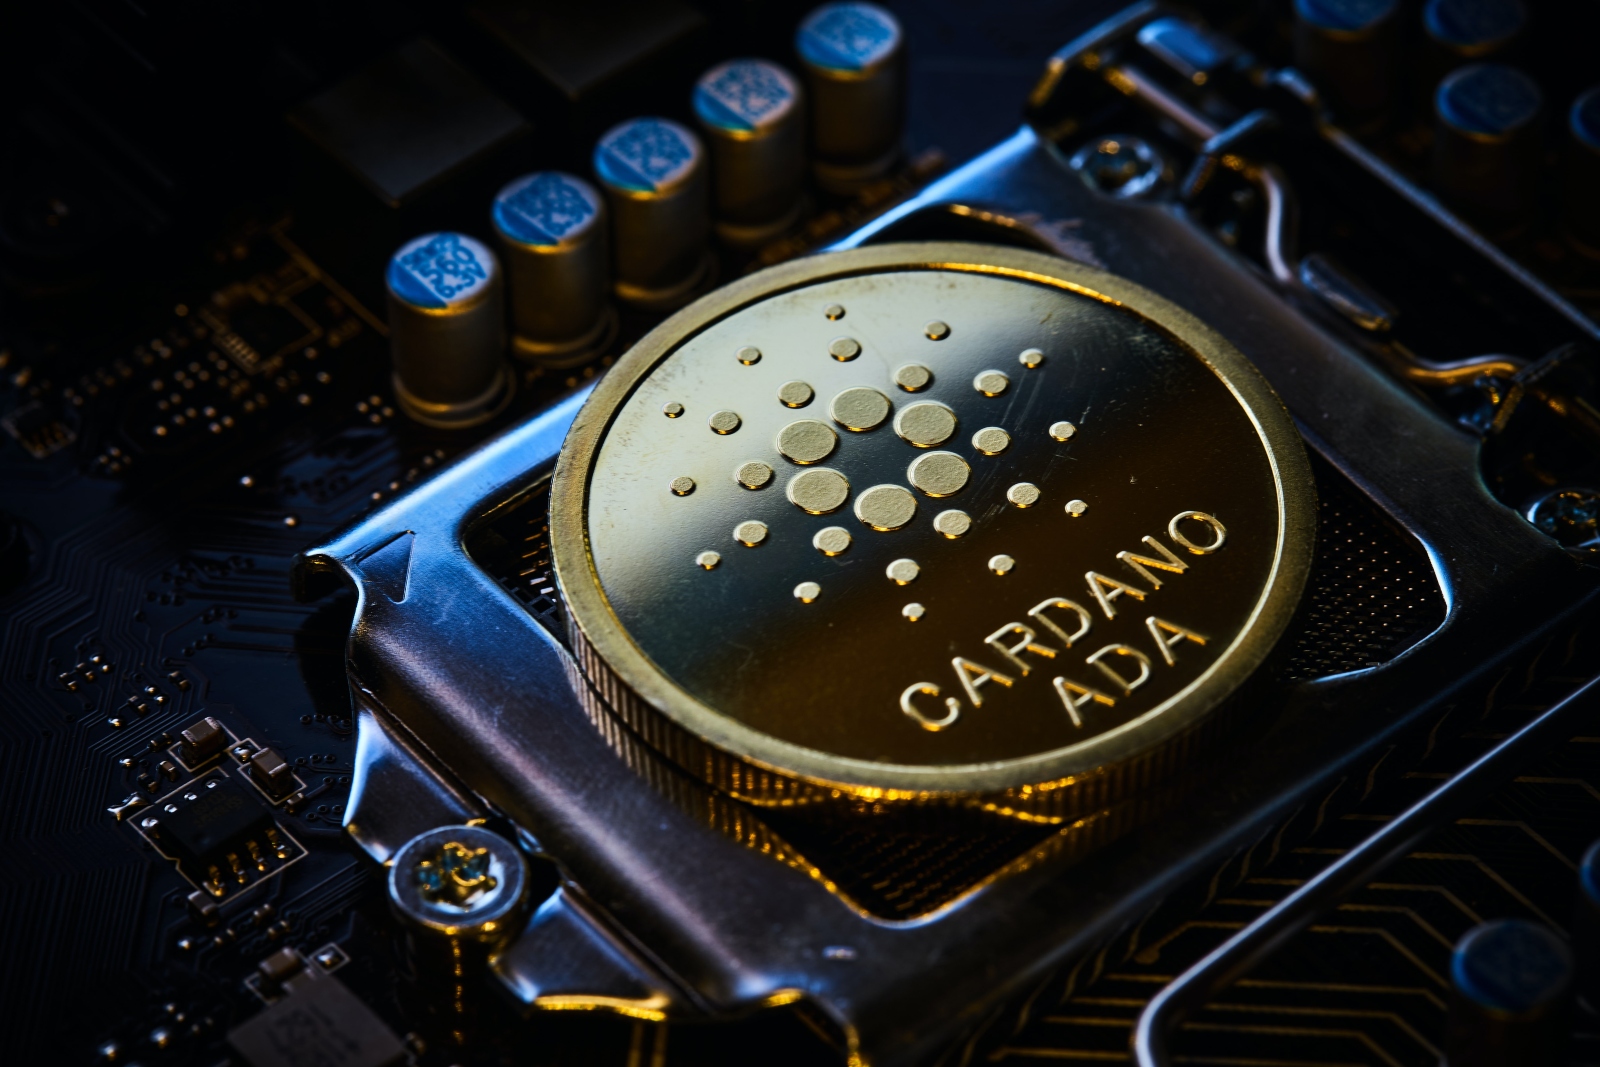 Cardano (ADA) to End 2022 at $0.51 and $2.45 in 2025 – Finder’s Report